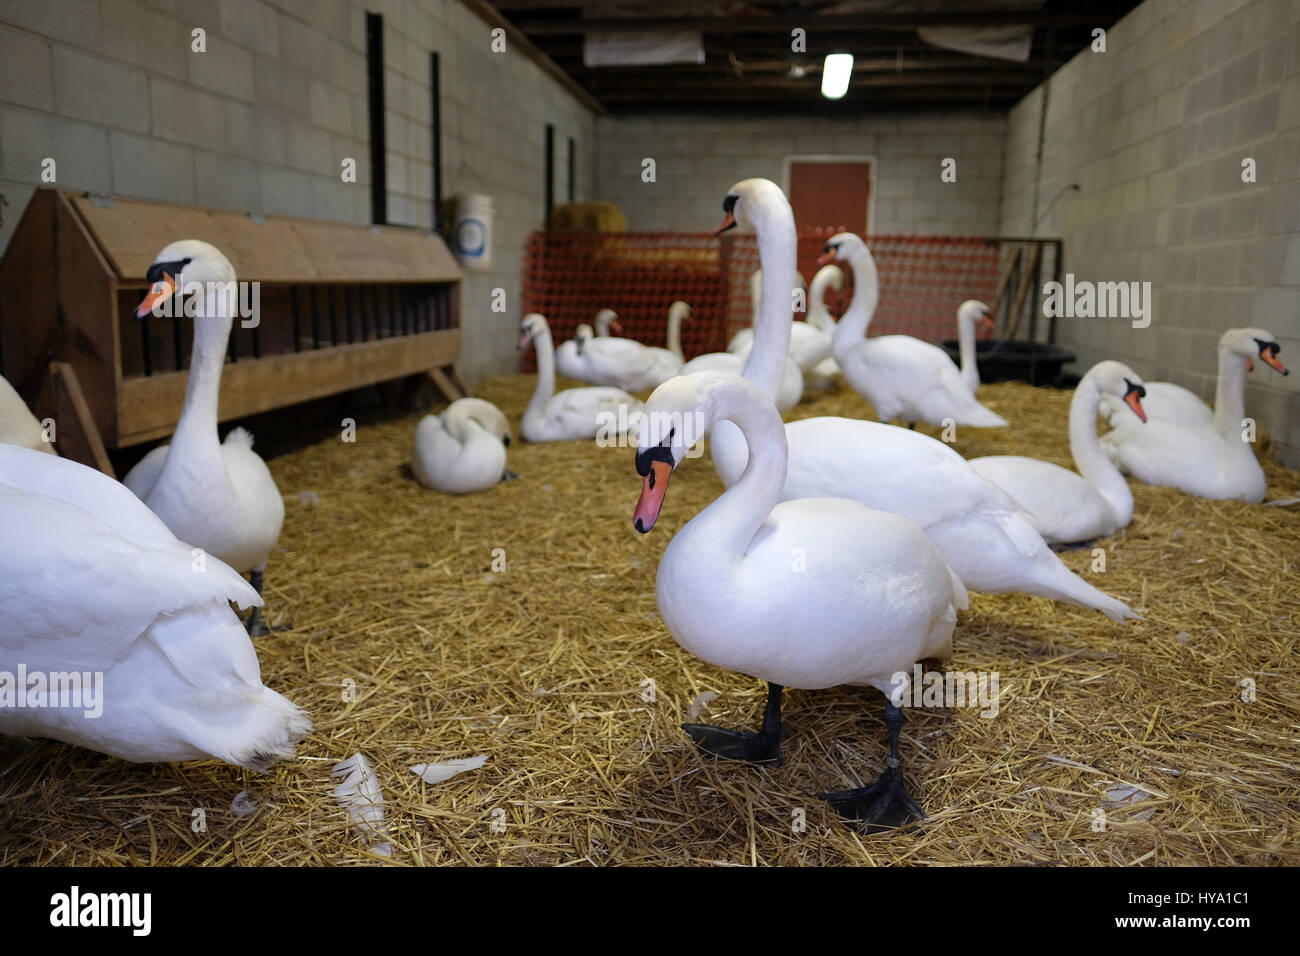 Stratford, Ontario, Canada, 2nd Apr, 2017. Flock of mute swans (Cygnus olor) in their enclosure just before marching down the streets of Stratford for the Stratford's Annual Swan Parade, when they return to the Avon River, in celebration of the arrival of Spring. Credit: Rubens Alarcon/Alamy Live News. Stock Photo